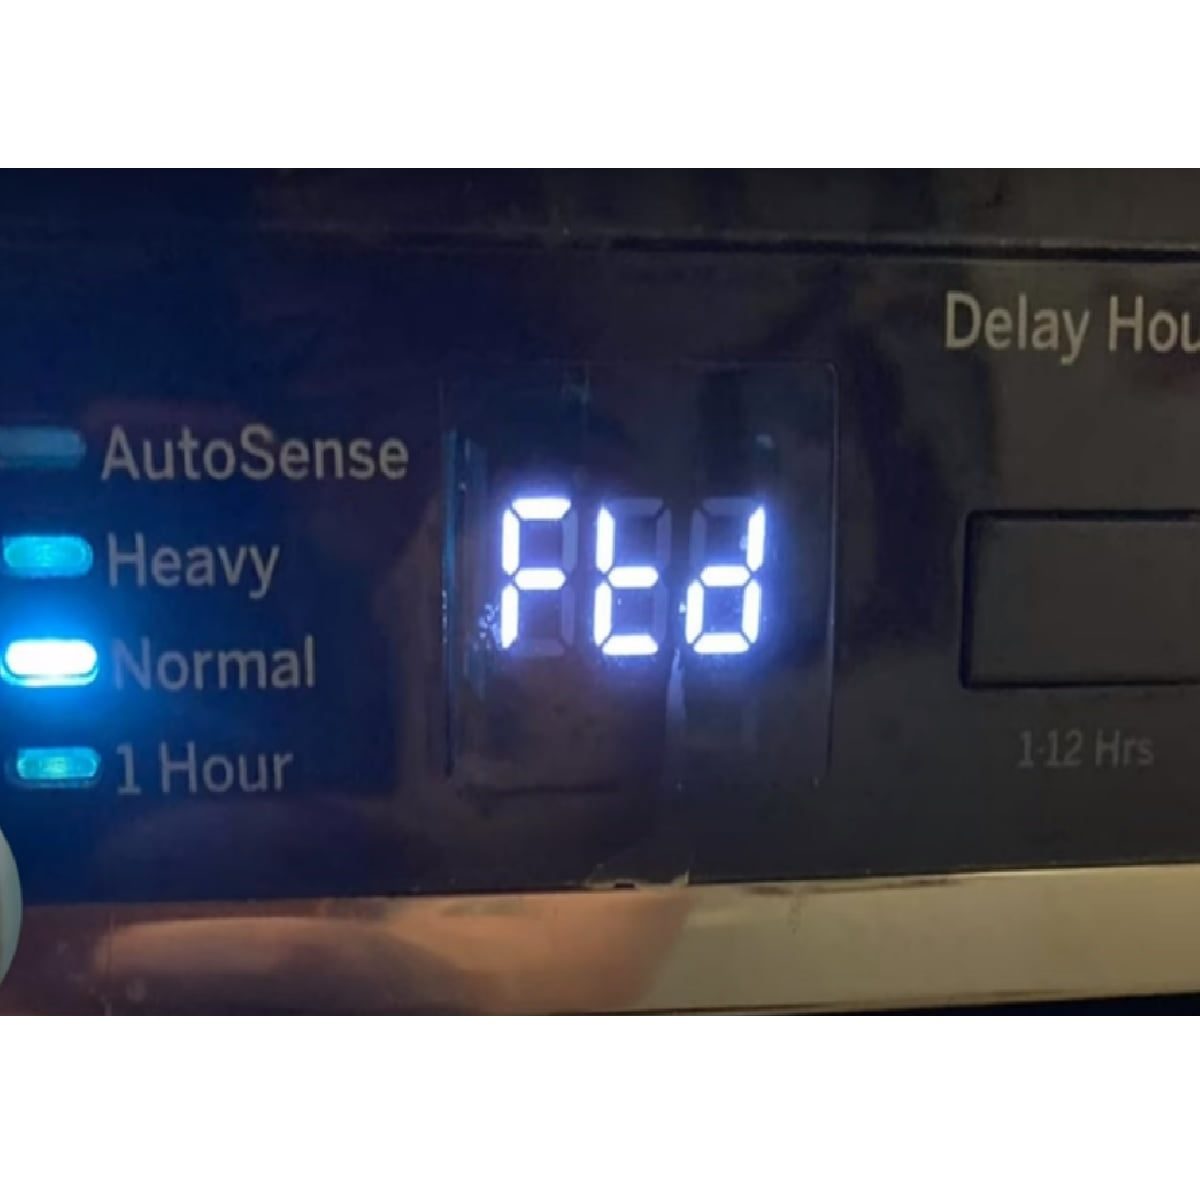 How to fix FTD code on GE dishwasher